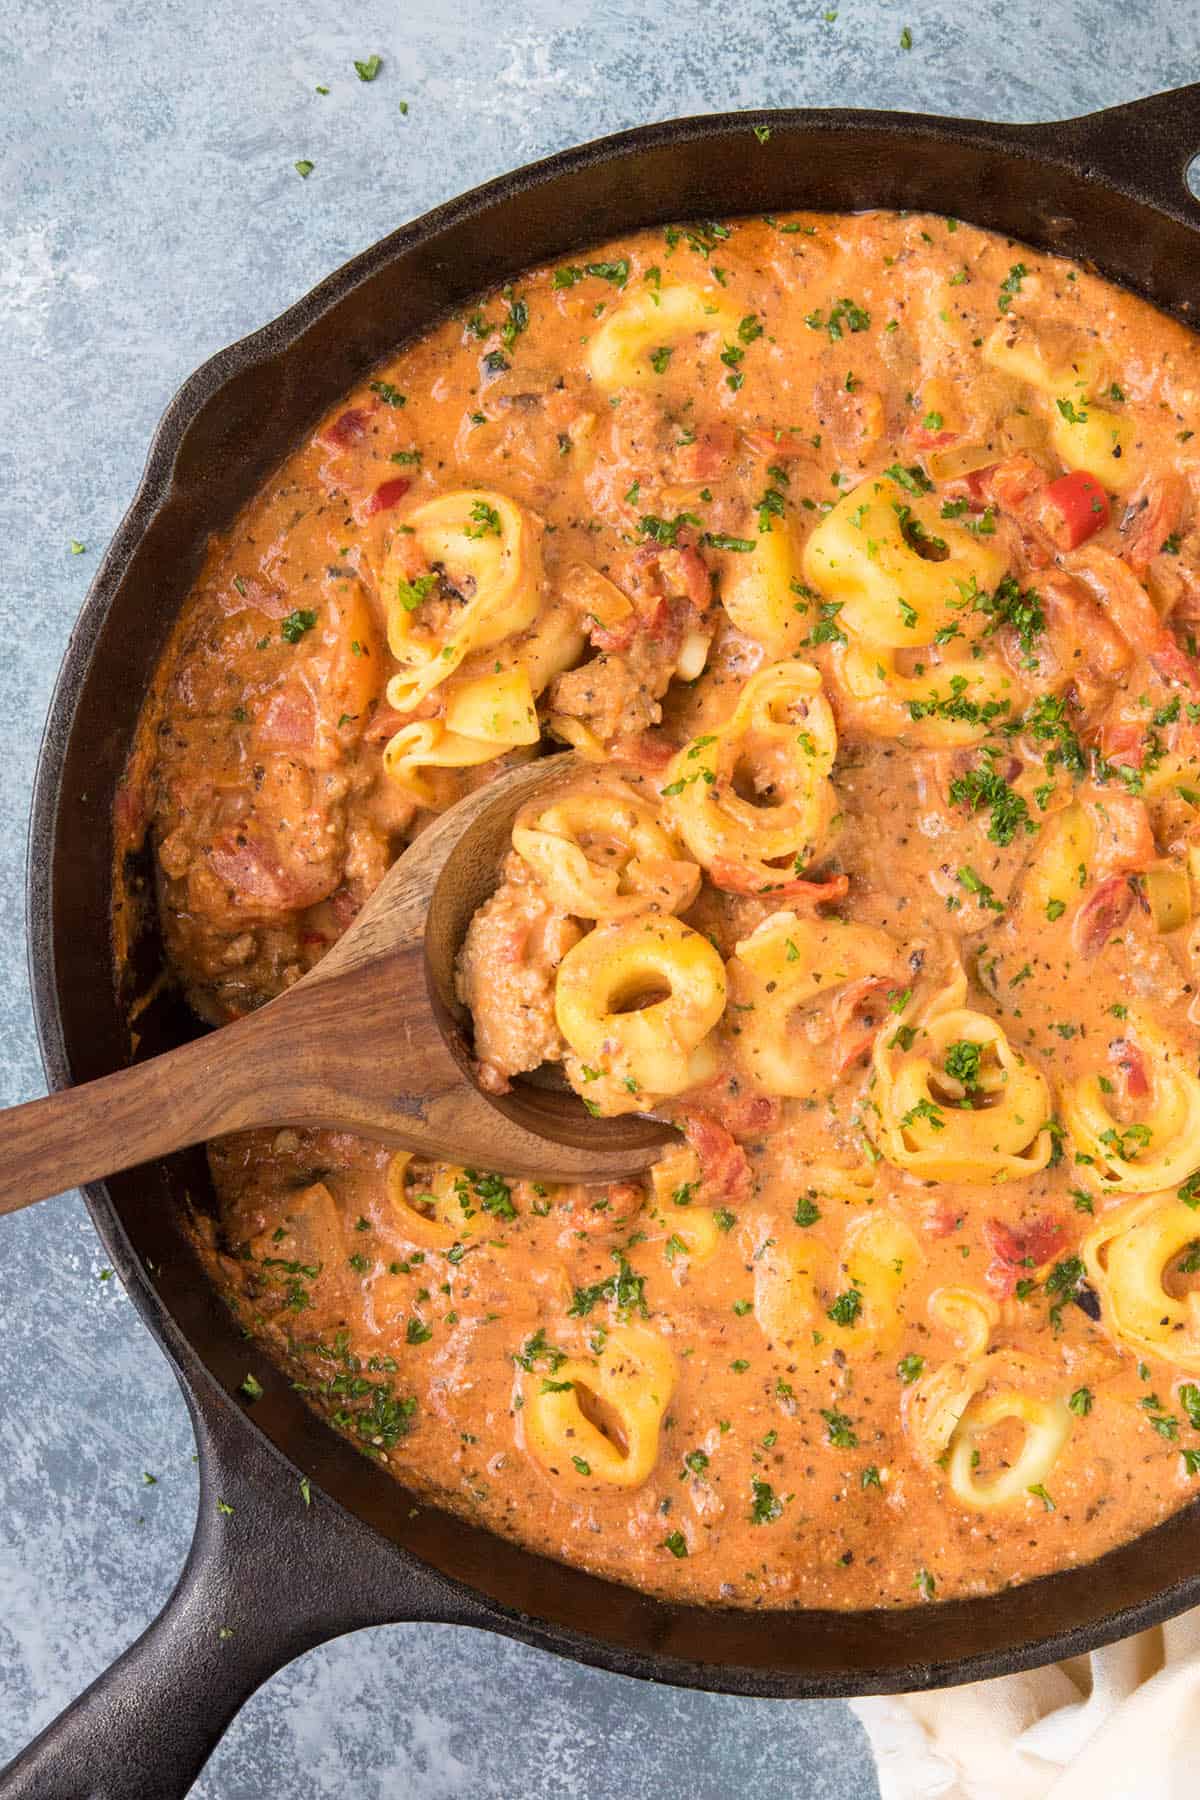 Creamy Tortellini Pasta with Fire Roasted Tomatoes - Recipe